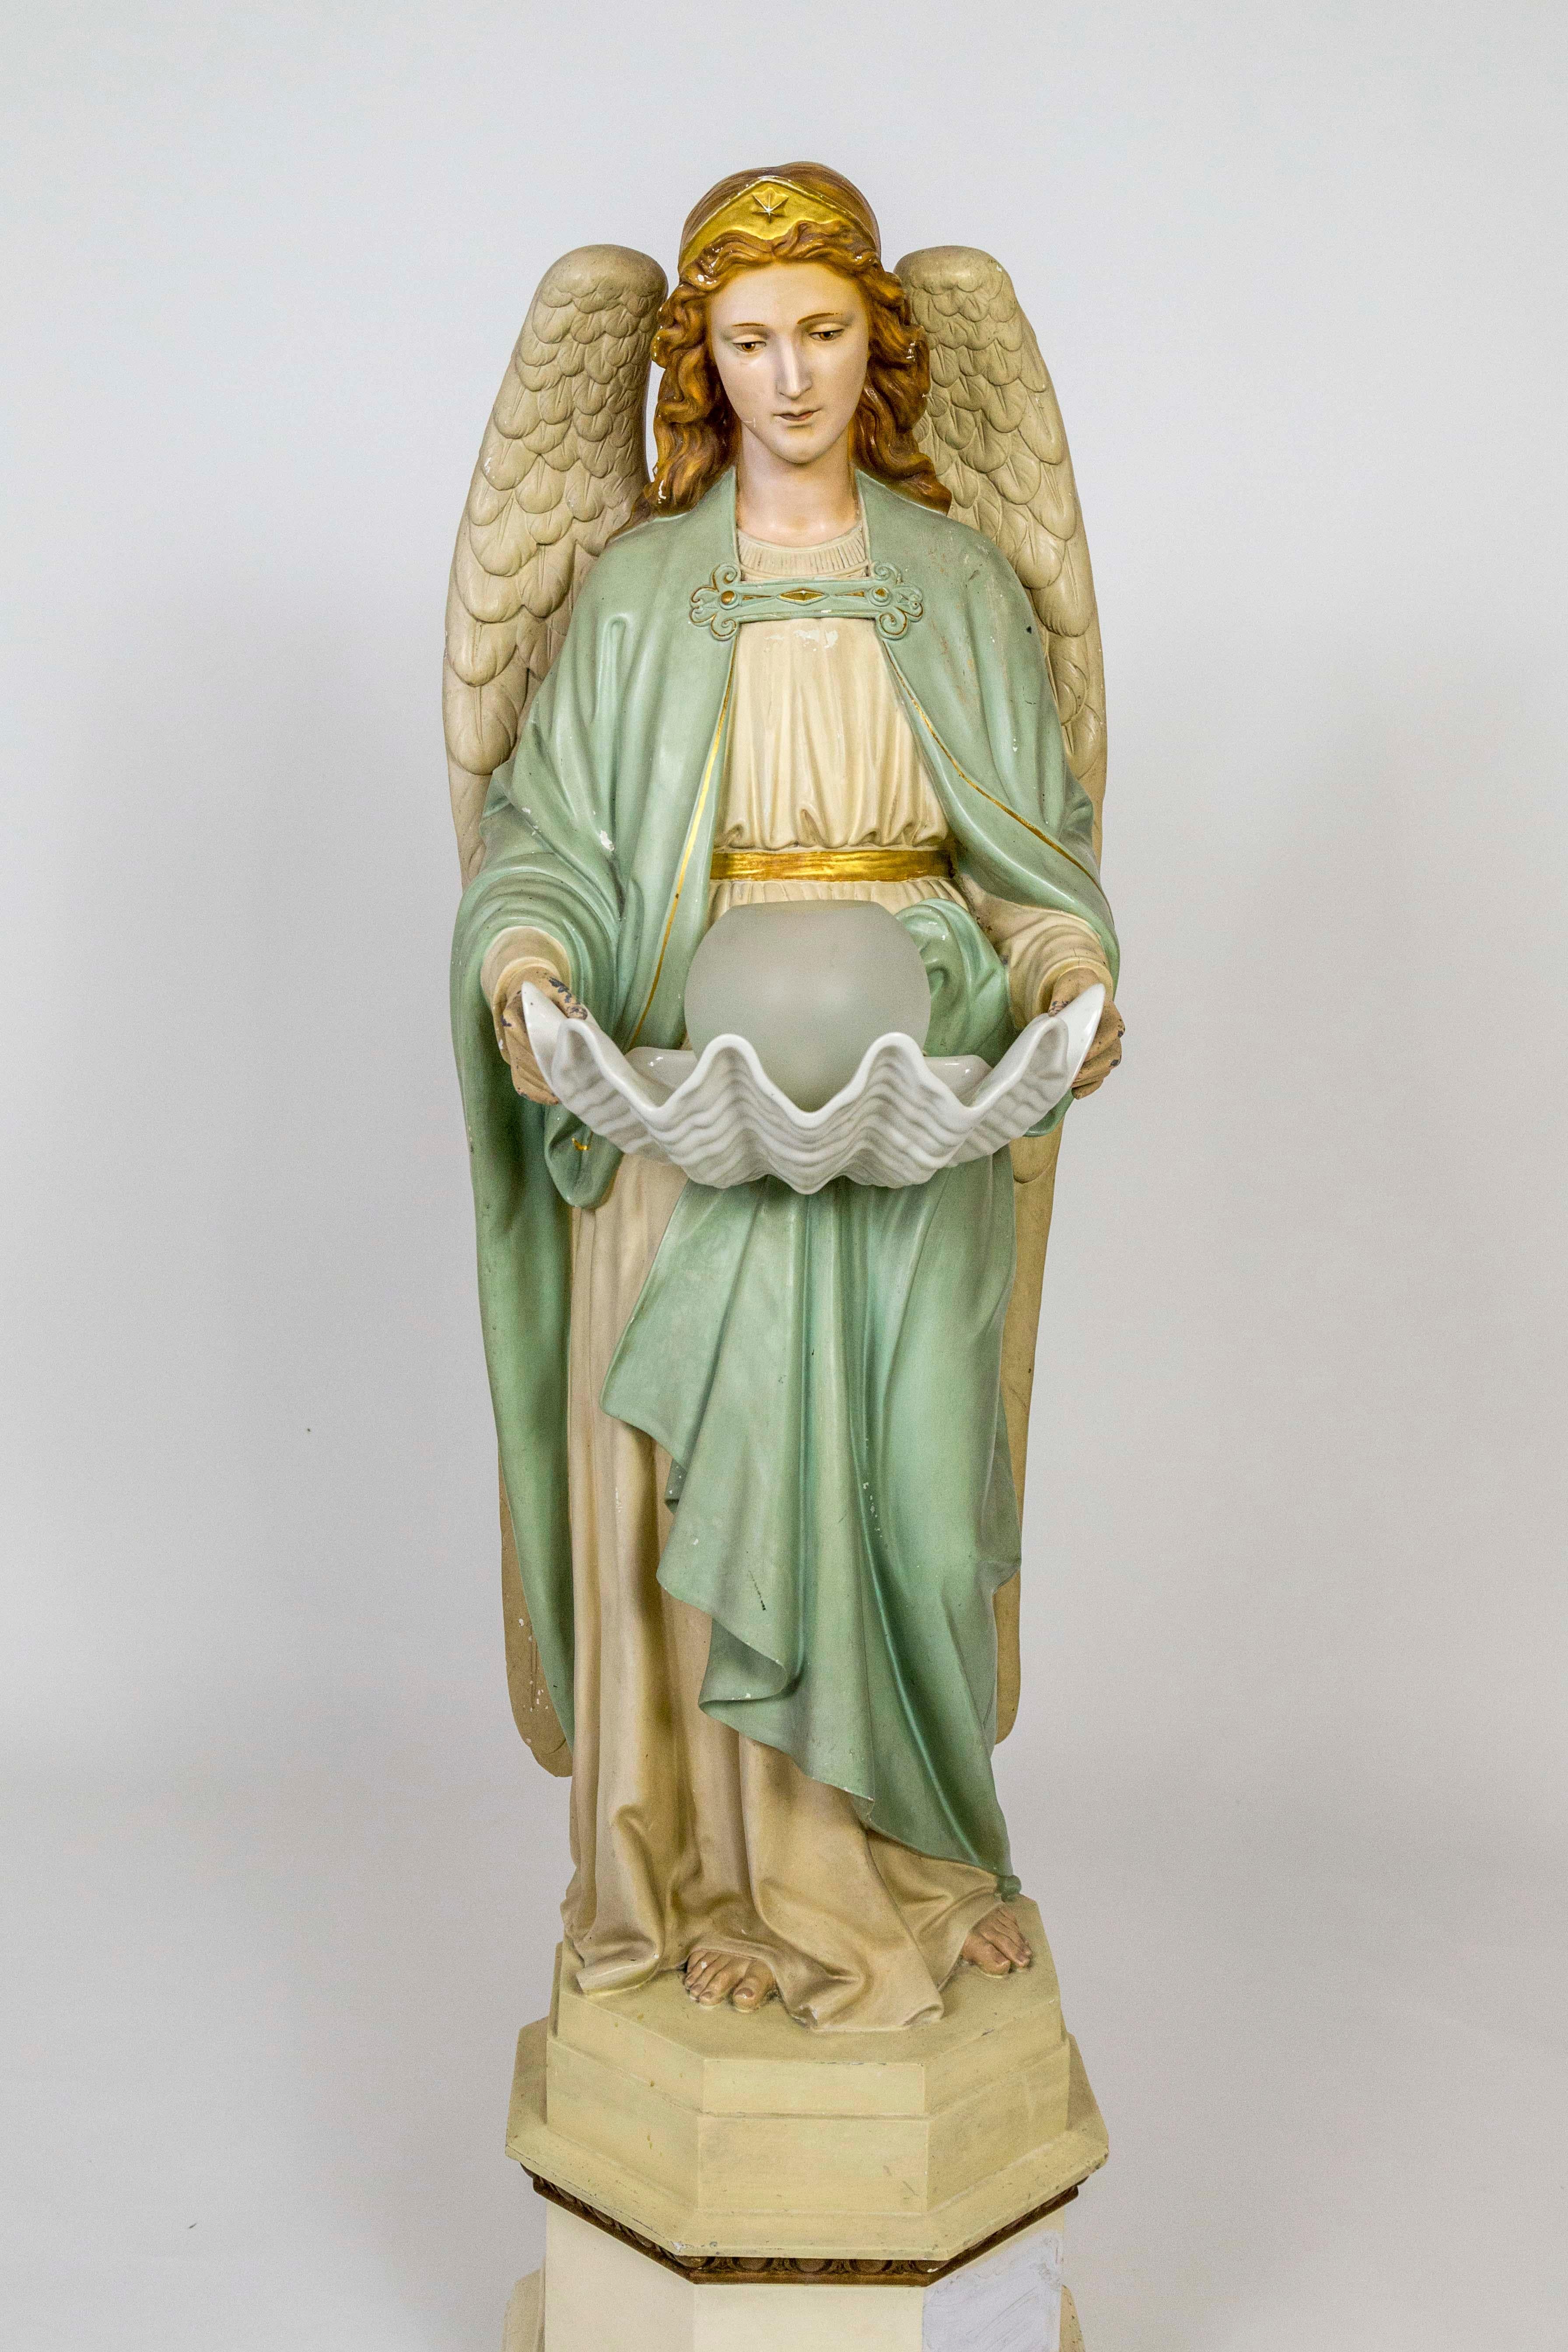 A life-sized, hand painted angel statue, holding a large, porcelain clam shell. In the shell is a removable, frosted glass ball shade with a light. Painted in a nice palette of color: dusty mint, gold, vanilla, and raw sienna. Made of plaster and